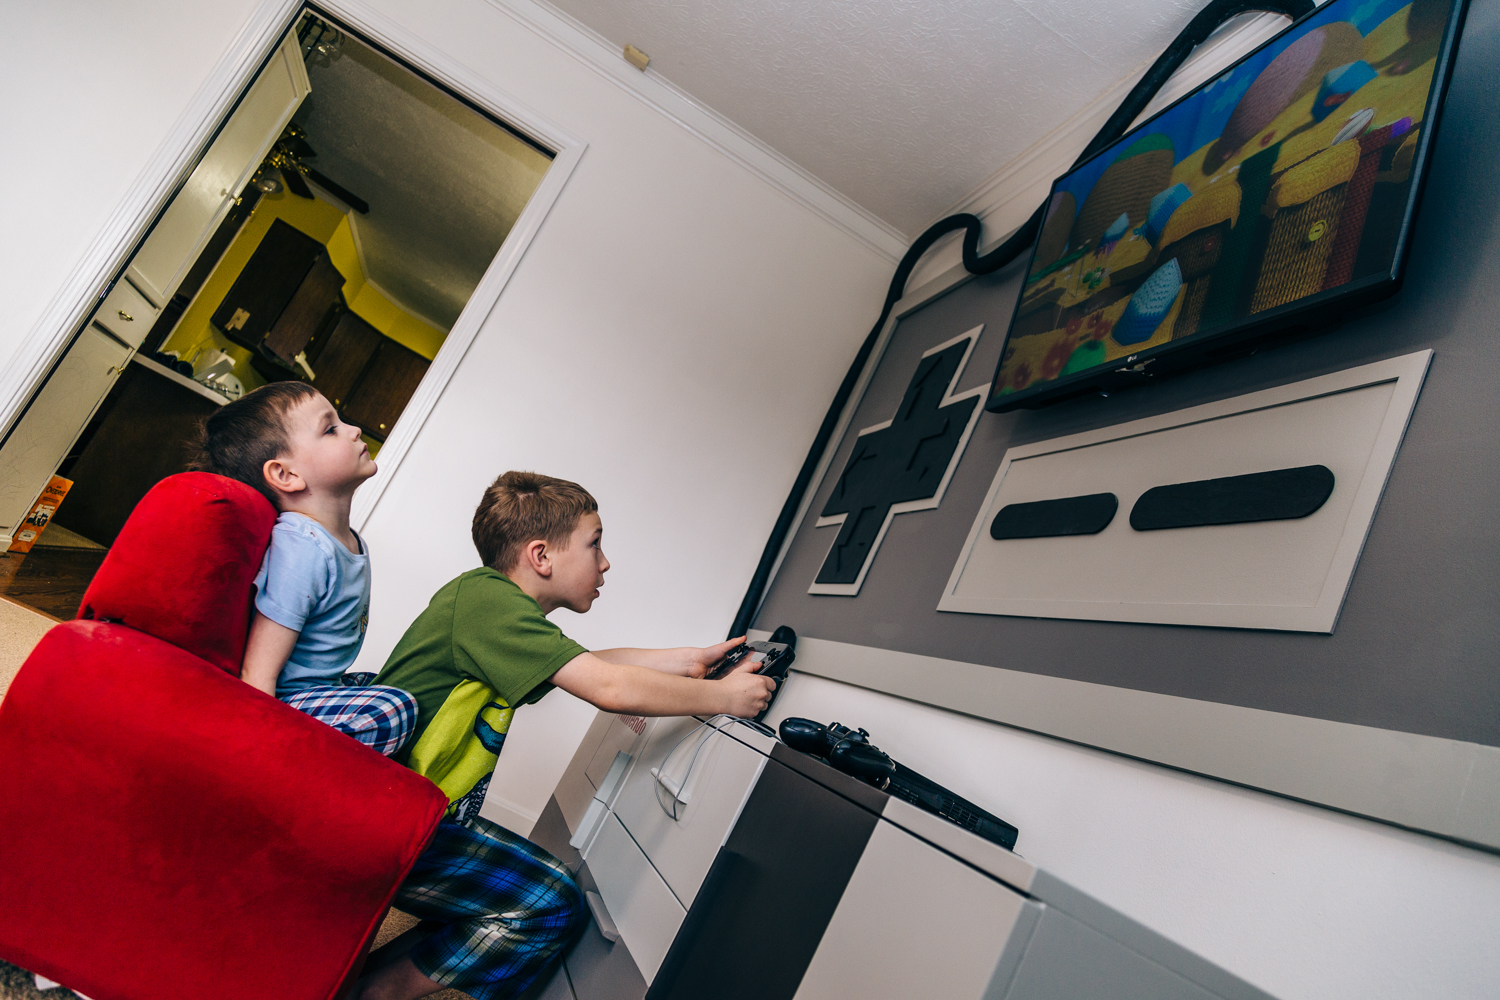 PHOTO: Sons love the ultimate Nintendo playroom their mom built for them.